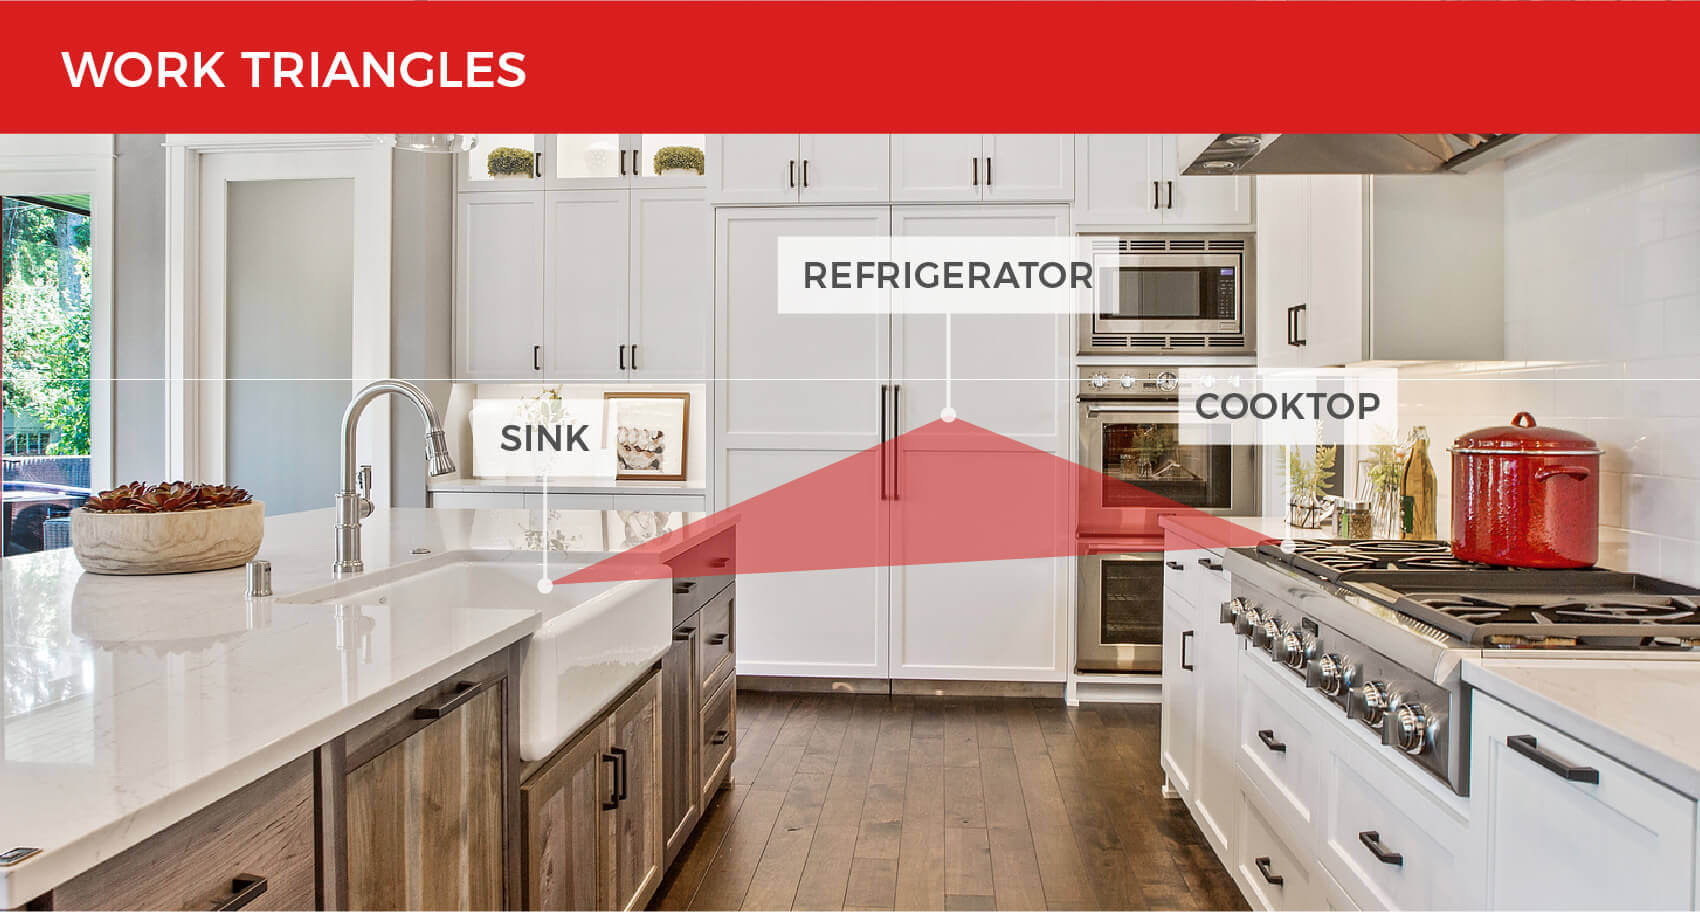 Diagram showing the work triangle between a kitchen sink, refrigerator, and stovetop.